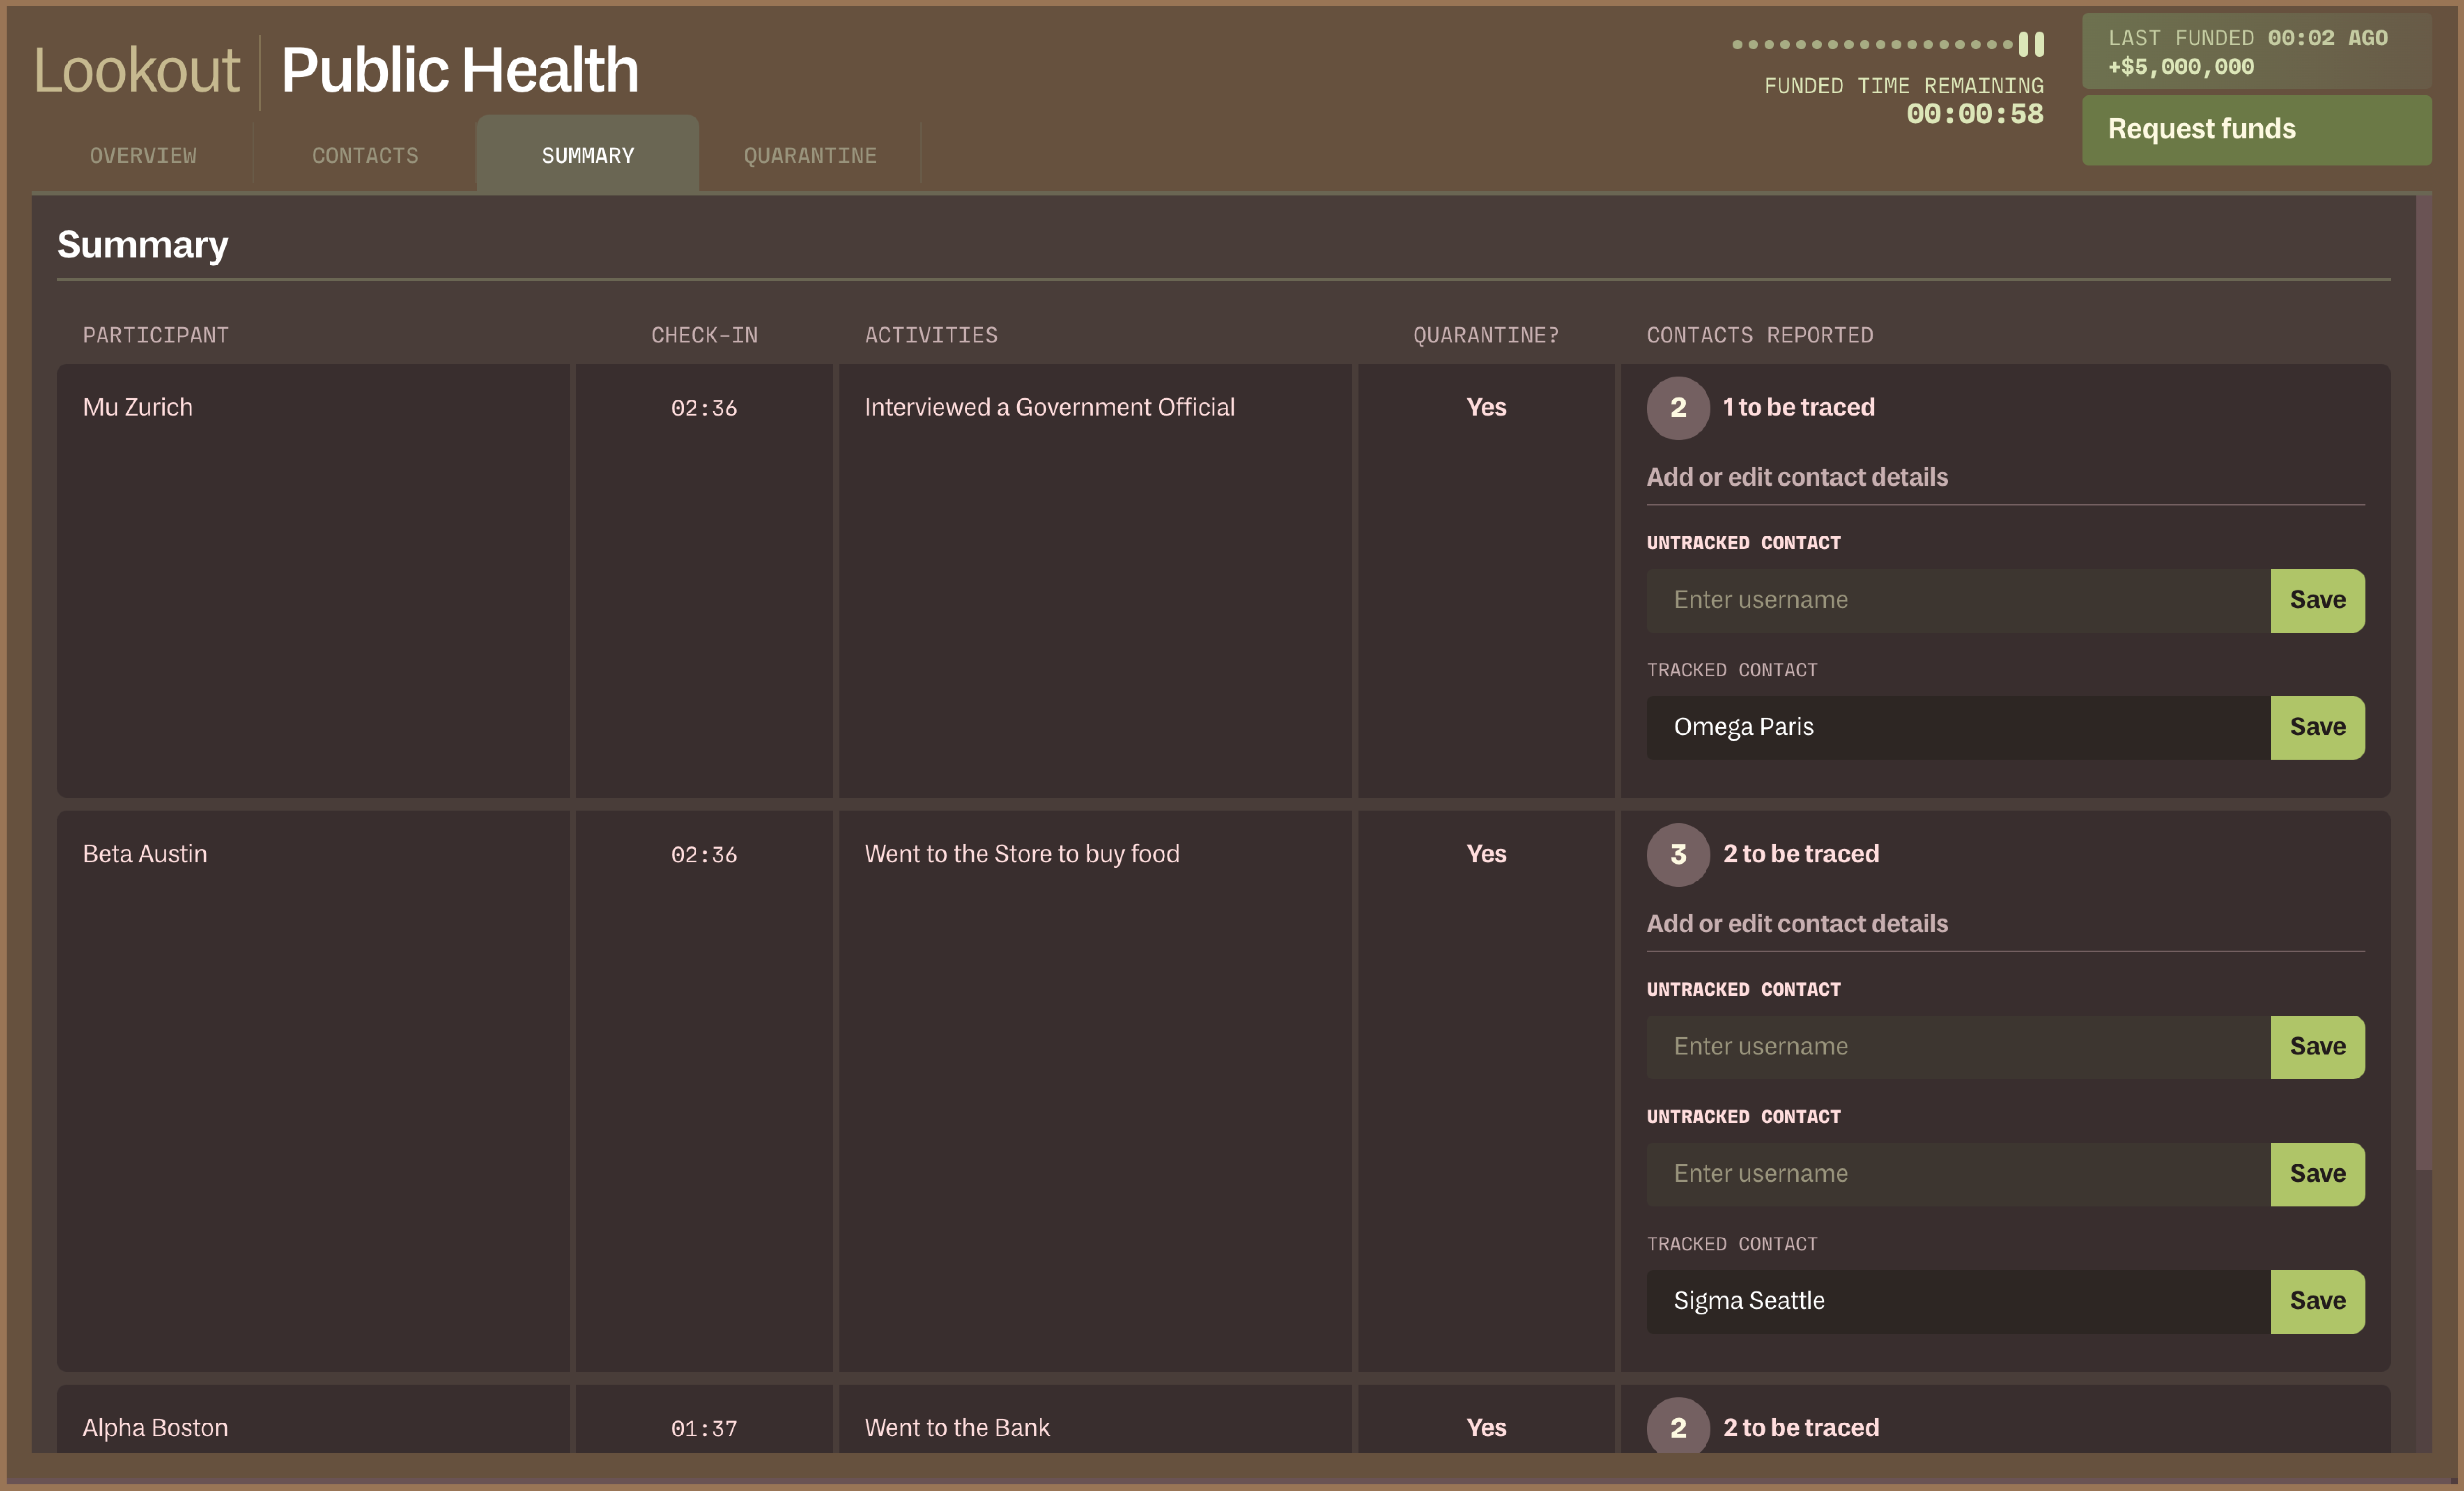 The summary page of the Public Health station in Lookout. The page lists all participants who have been reported to Public Health, with their name, time of check-in, activities, whether they were quarantined, and any contacts they reported.